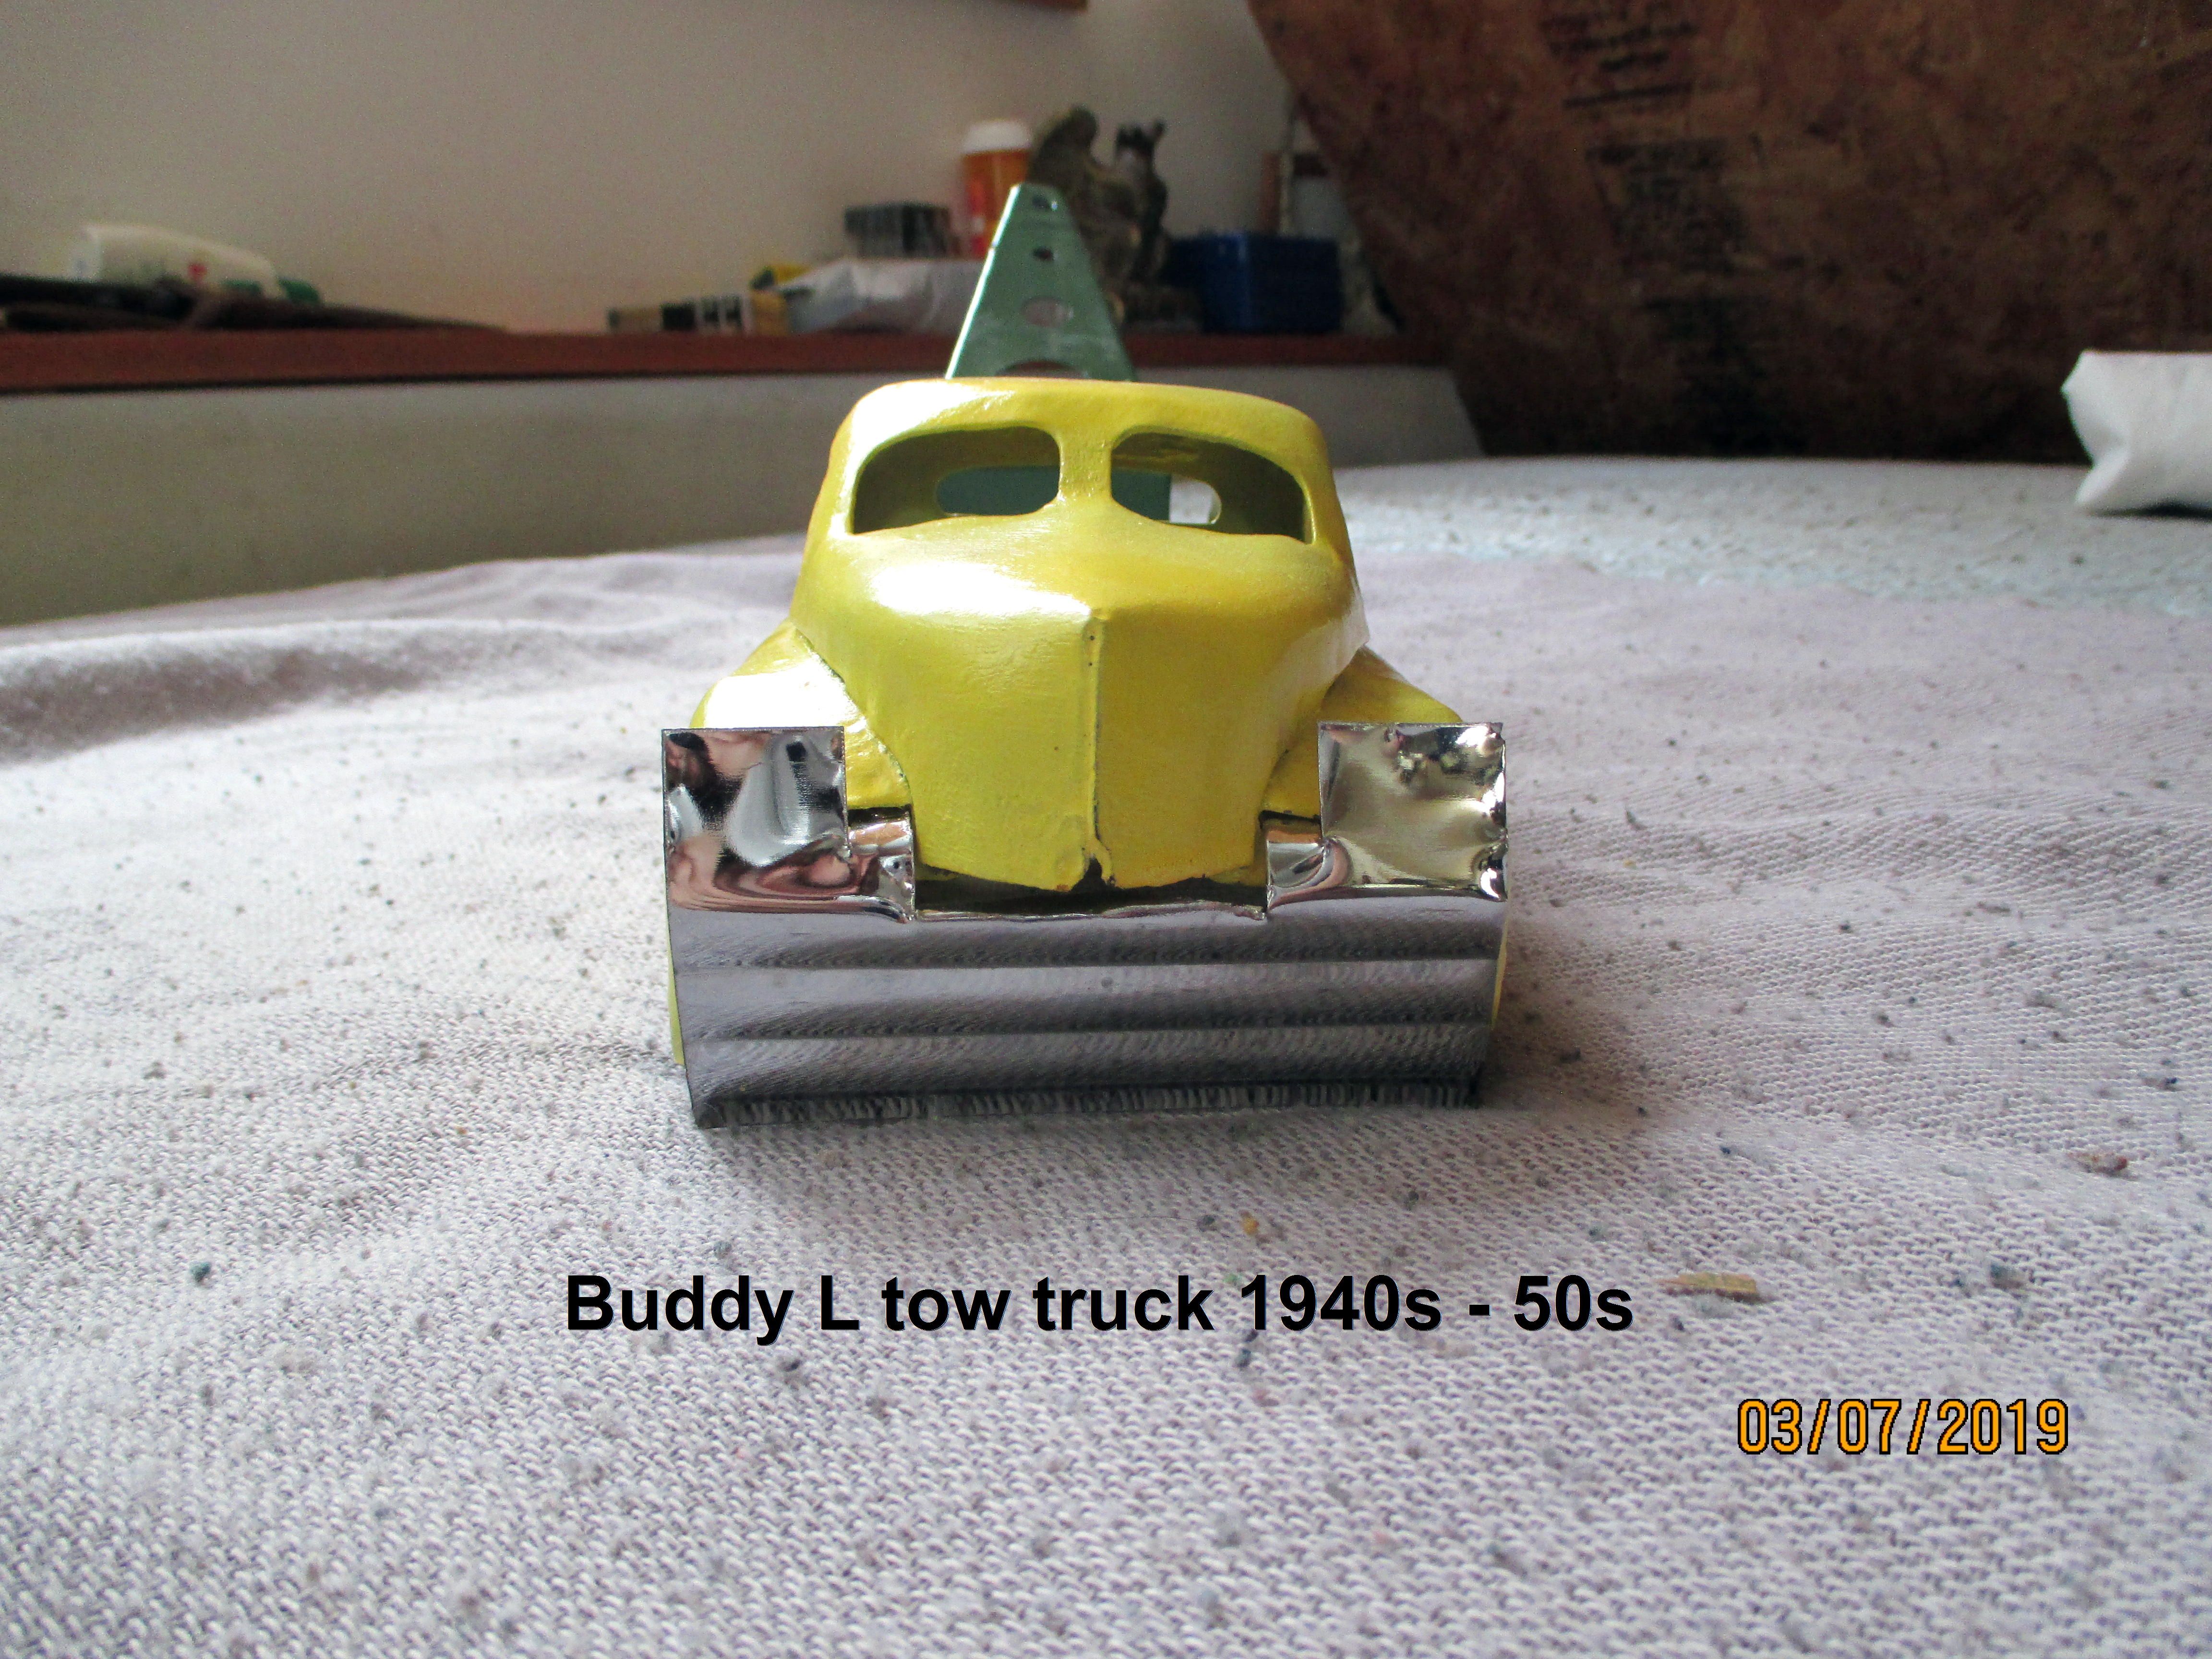 Buddy L tow truck 1940s   50s pic 3